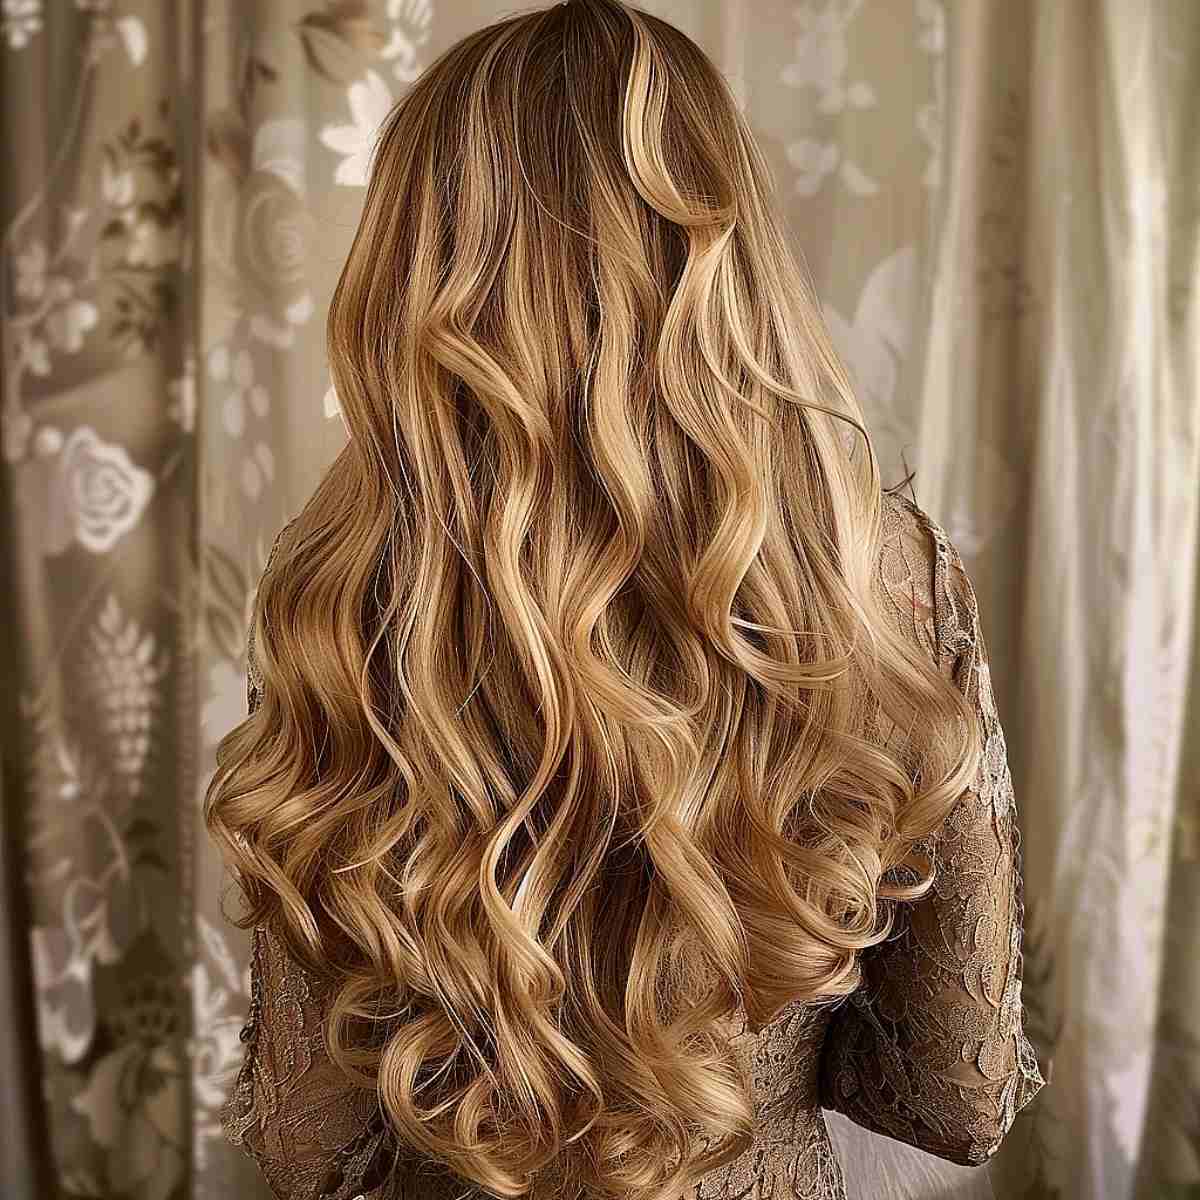 70+ Incredible Hairstyles For Thin Hair